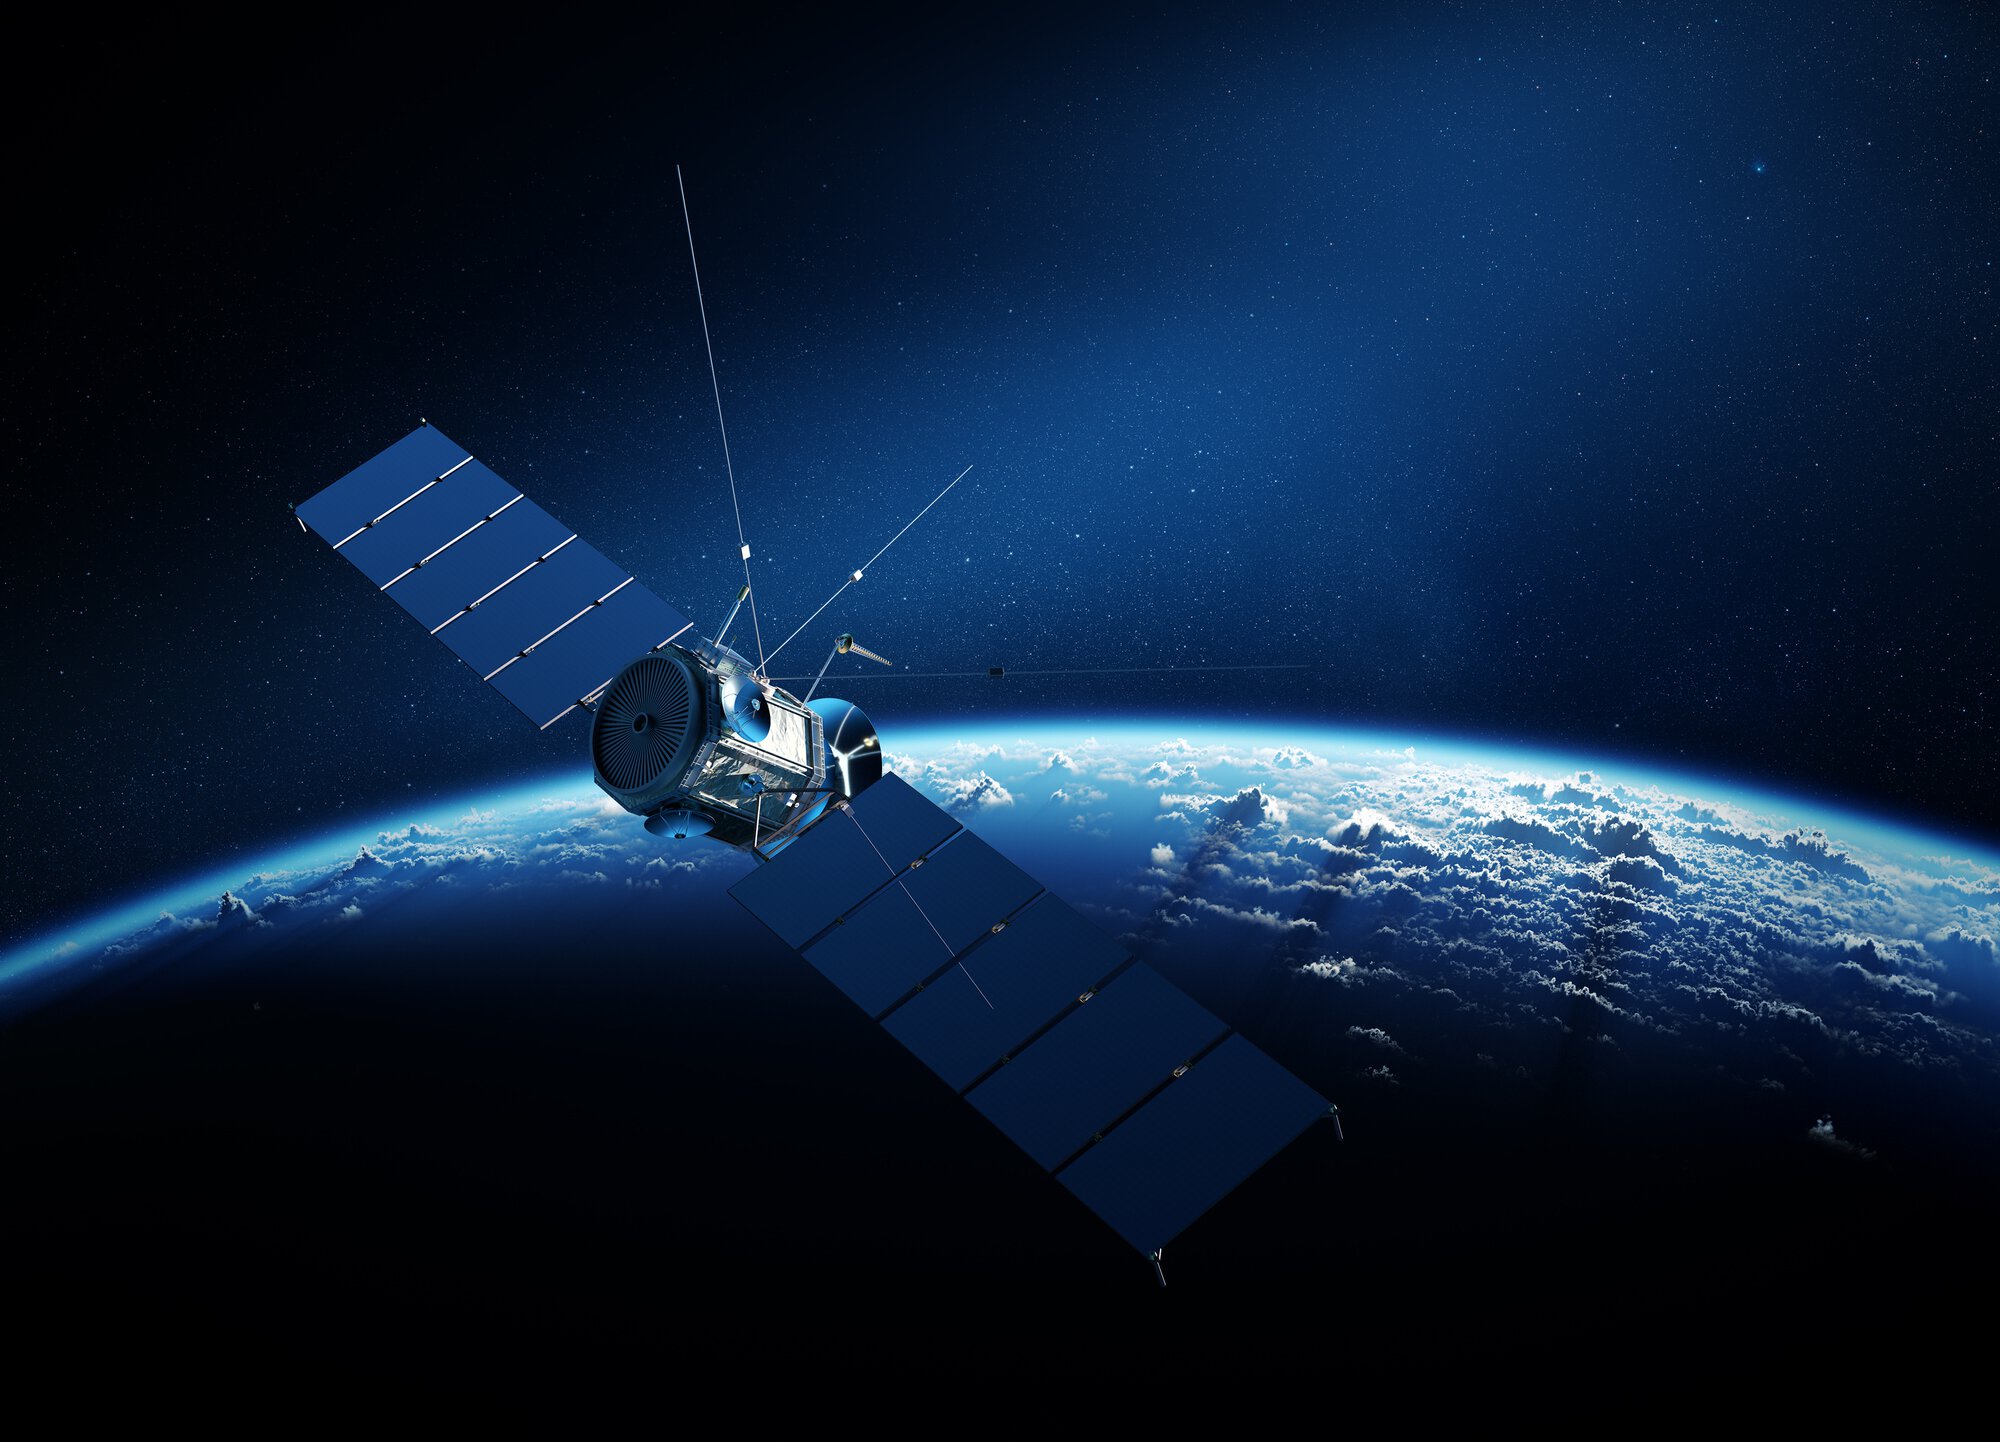 Communications satellite orbiting Earth with sunrise in space
494562740